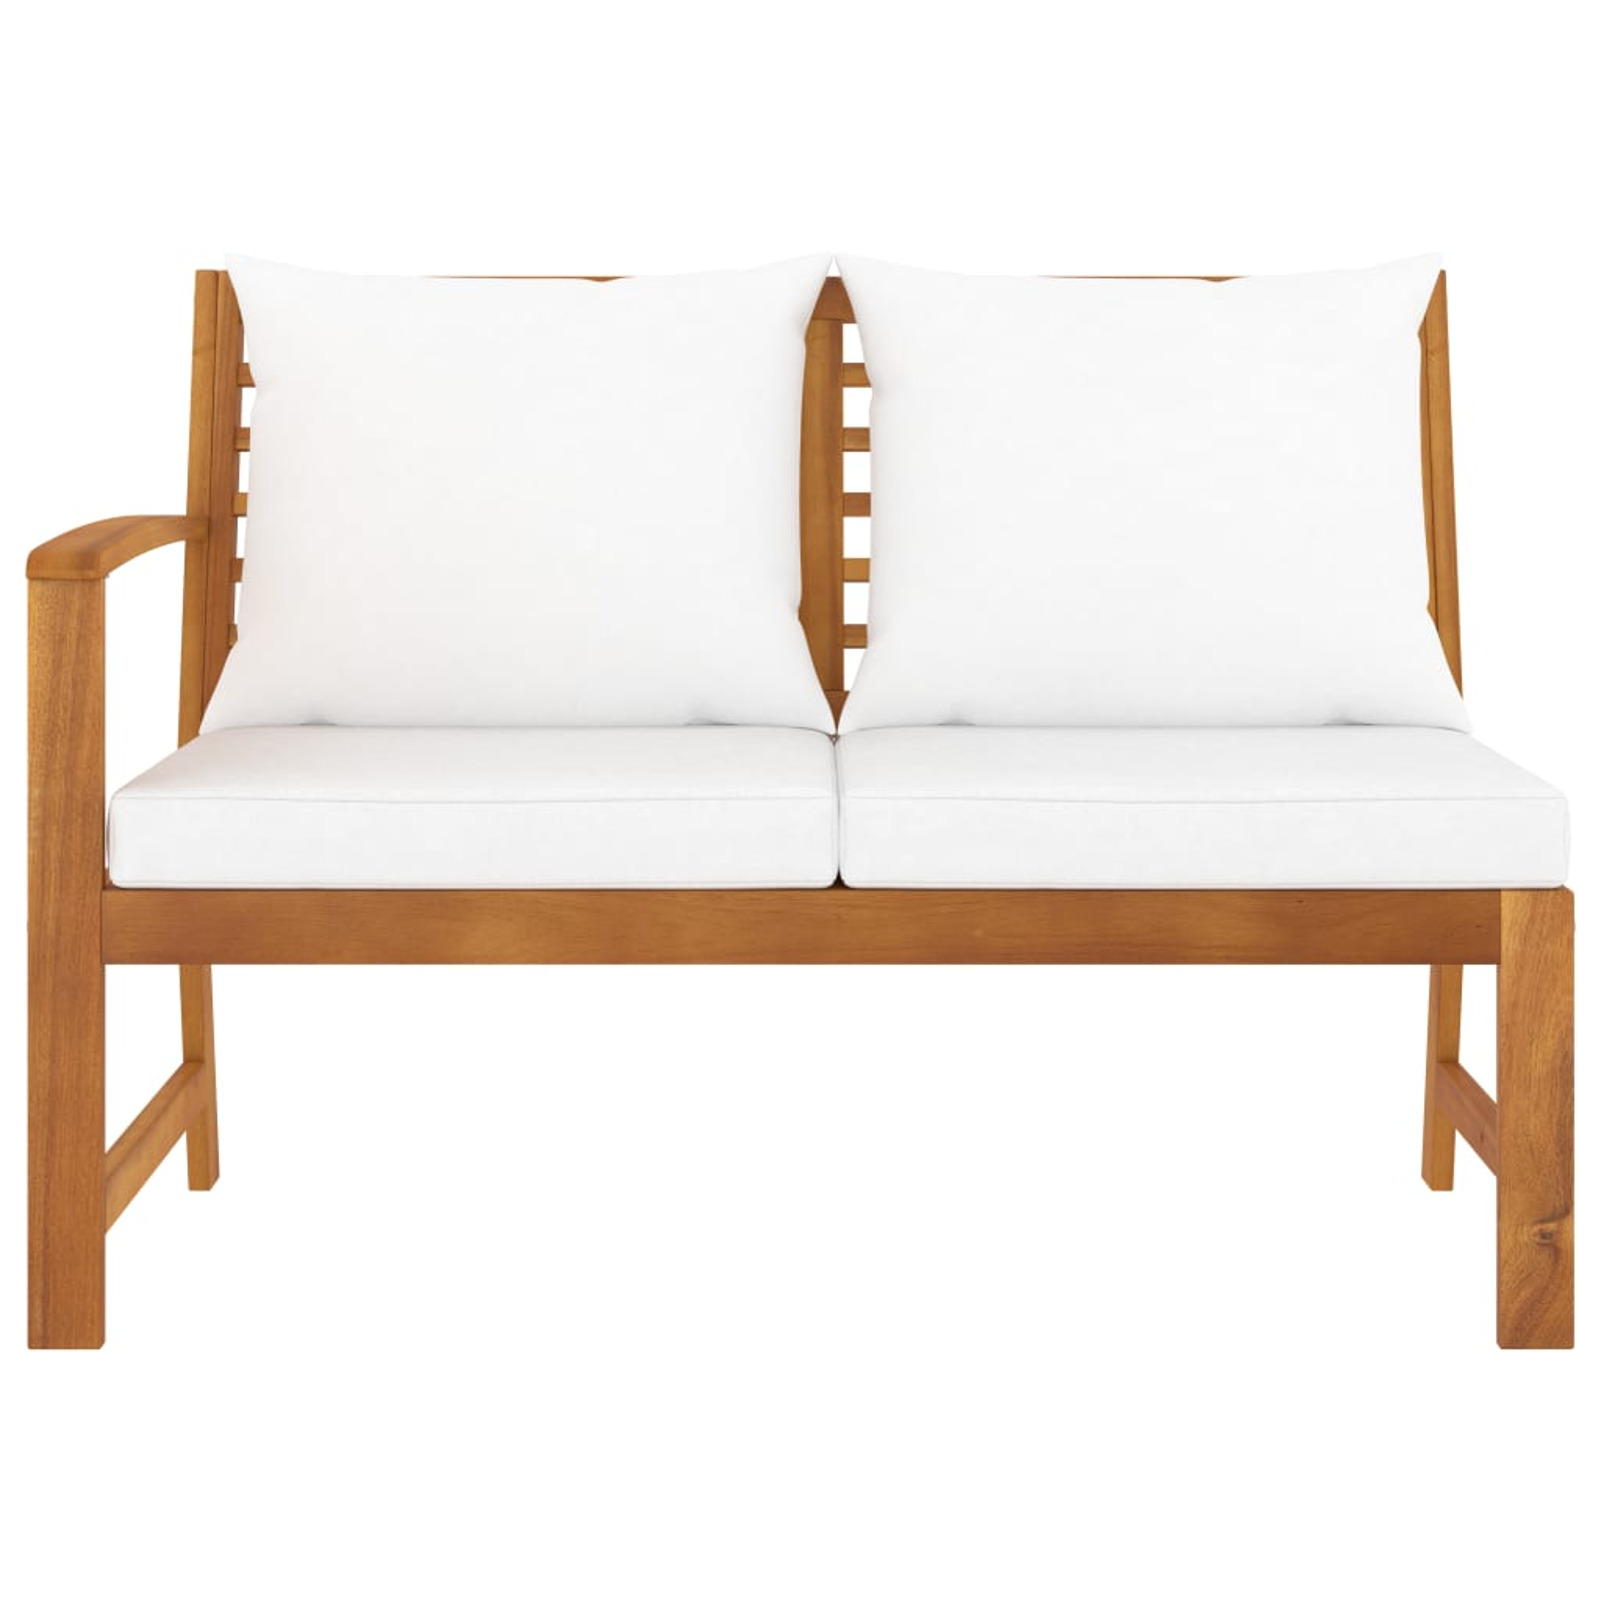 Carevas Patio Bench 45.1" with Cushion Solid Acacia Wood - image 2 of 6